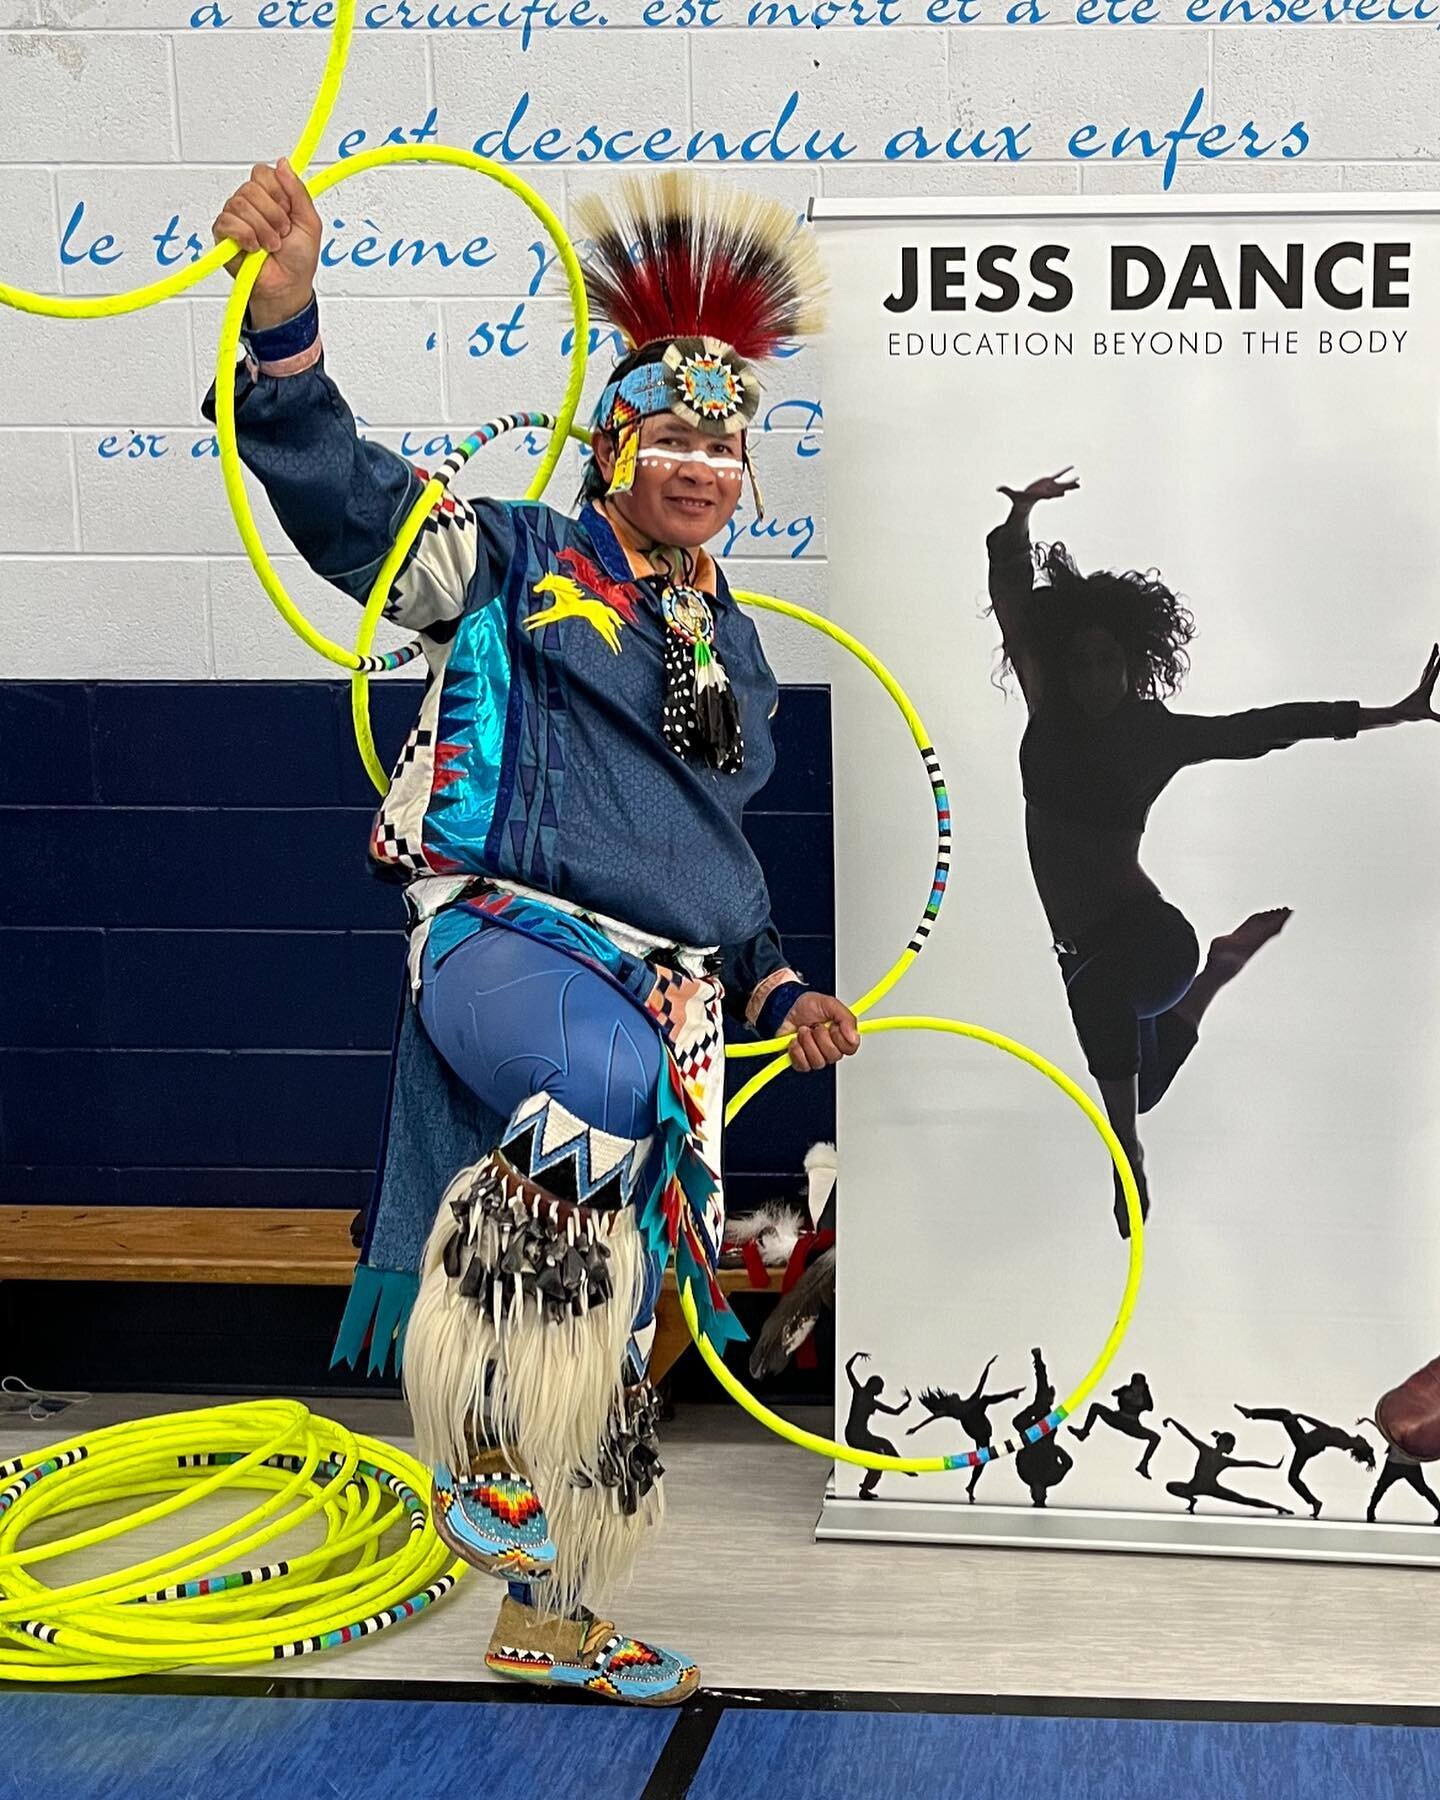 To say it&rsquo;s an honour and a privilege to bring Indigenous dance to school kids is an understatement.  It&rsquo;s the very least I can do.  Alex has a way with the kids&hellip;every single one of them engaged and trying (successfully,) their new